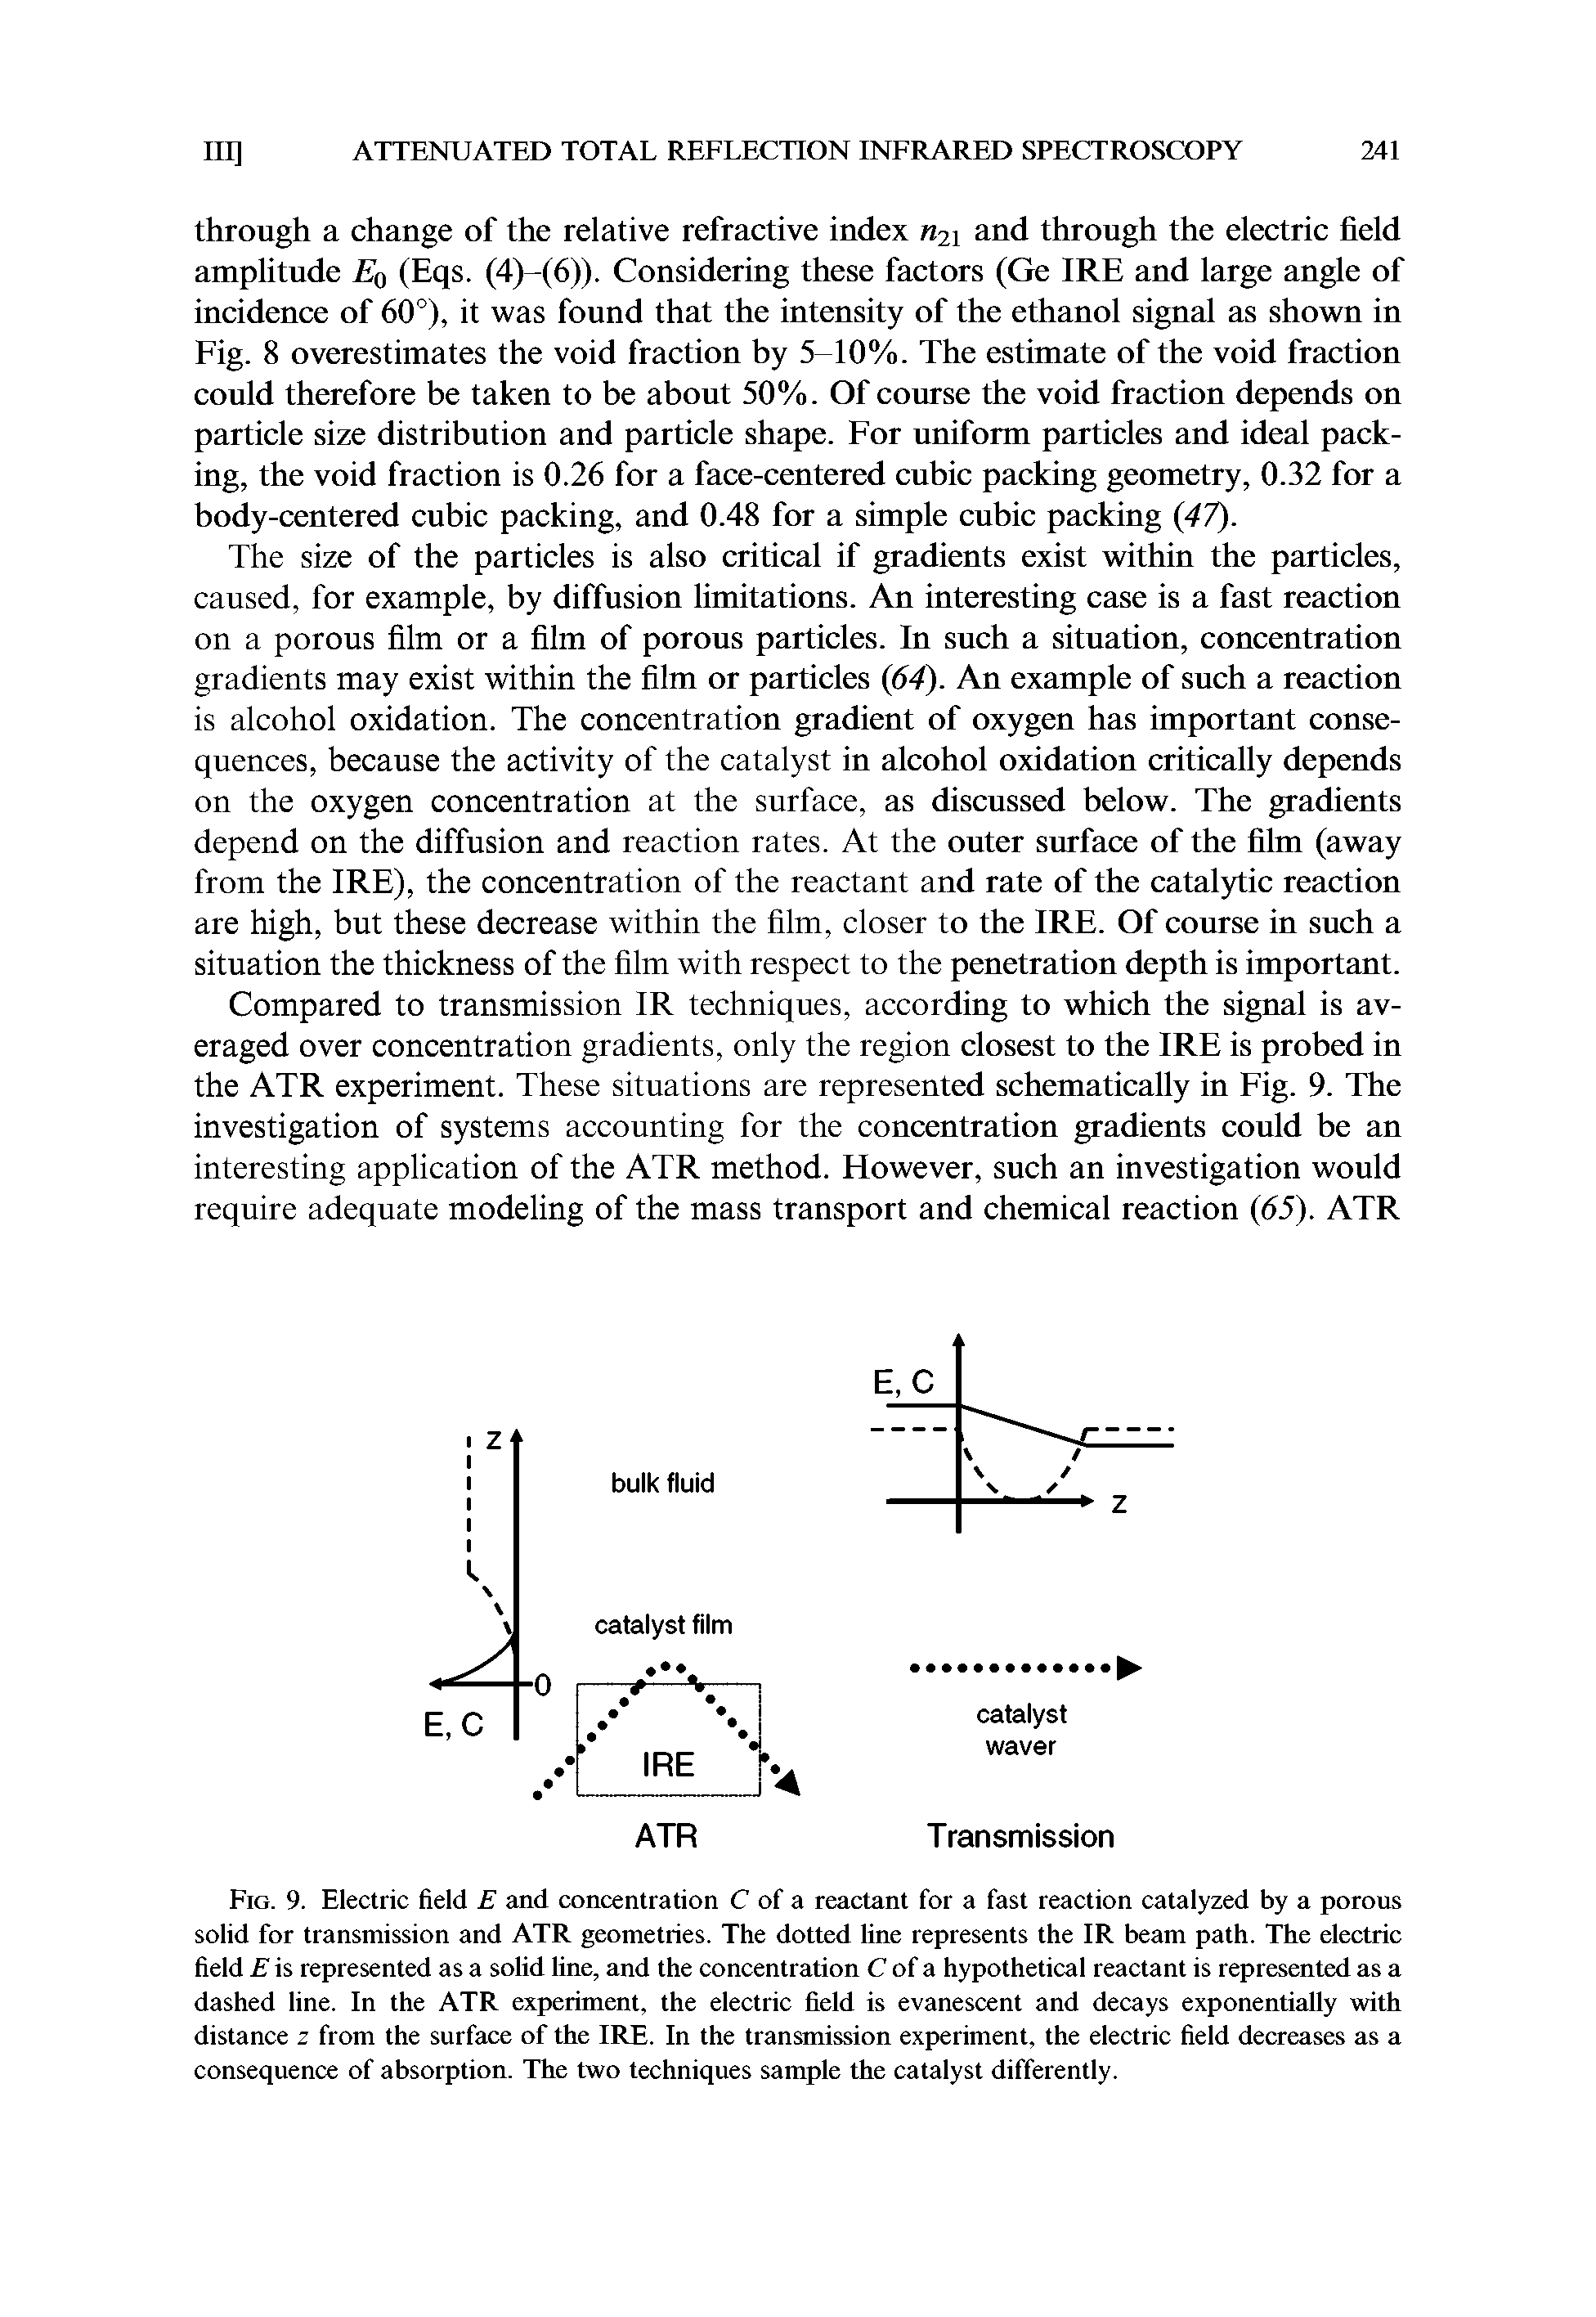 Fig. 9. Electric field E and concentration C of a reactant for a fast reaction catalyzed by a porous solid for transmission and ATR geometries. The dotted line represents the IR beam path. The electric field E is represented as a solid line, and the concentration C of a hypothetical reactant is represented as a dashed line. In the ATR experiment, the electric field is evanescent and decays exponentially with distance z from the surface of the IRE. In the transmission experiment, the electric field decreases as a consequence of absorption. The two techniques sample the catalyst differently.